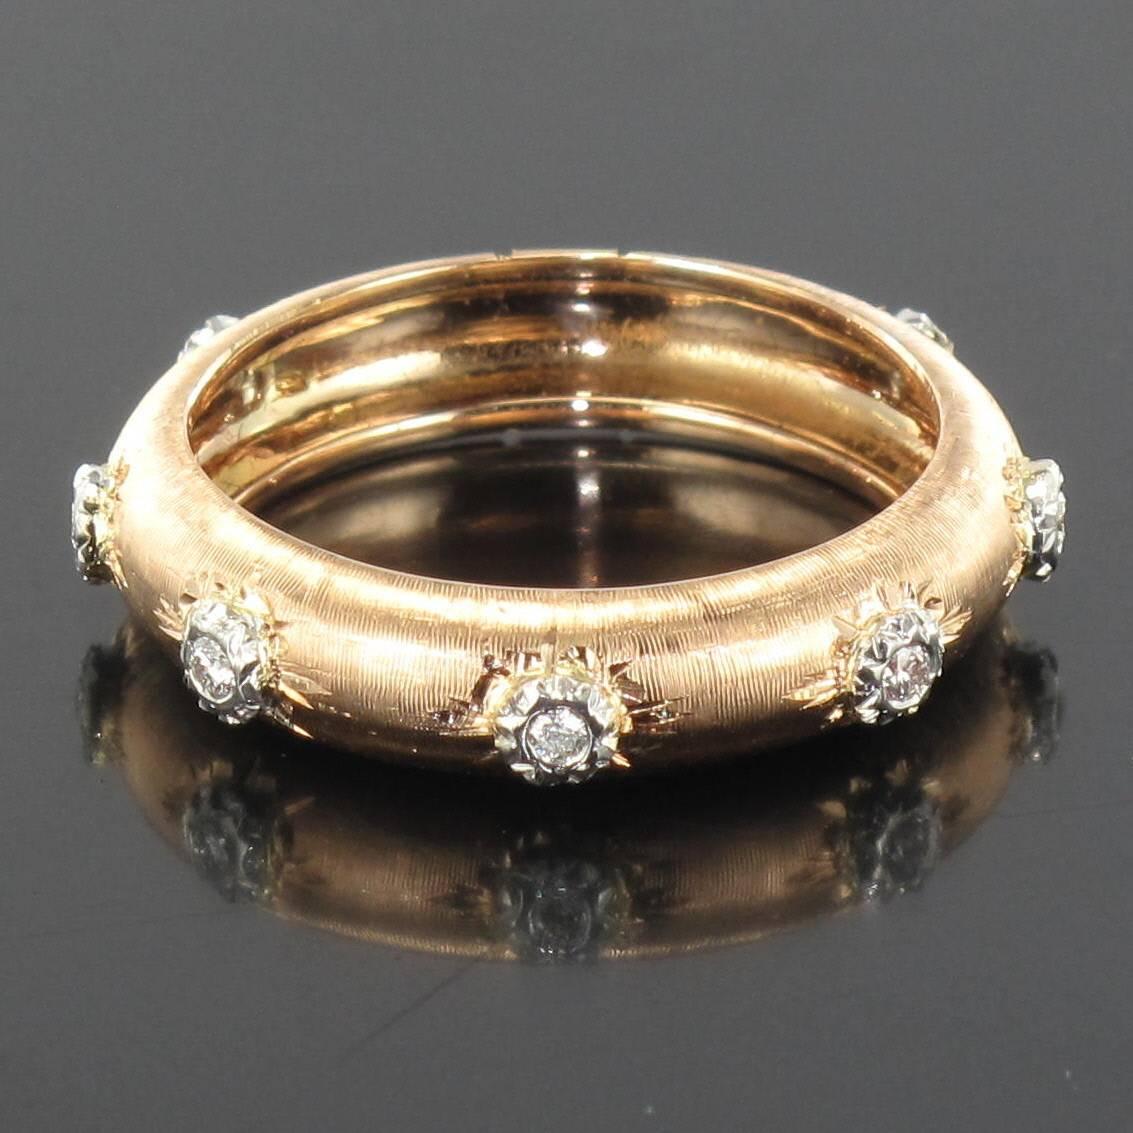 Ring in 18 carat rose gold.
This delightful rounded brushed rose gold ring is engraved and set with 7 brilliant cut diamonds. This diamond ring would make an excellent eternity ring. 
Total weight – diamonds: 0.10 carats approximately 
Width: 4.6 mm